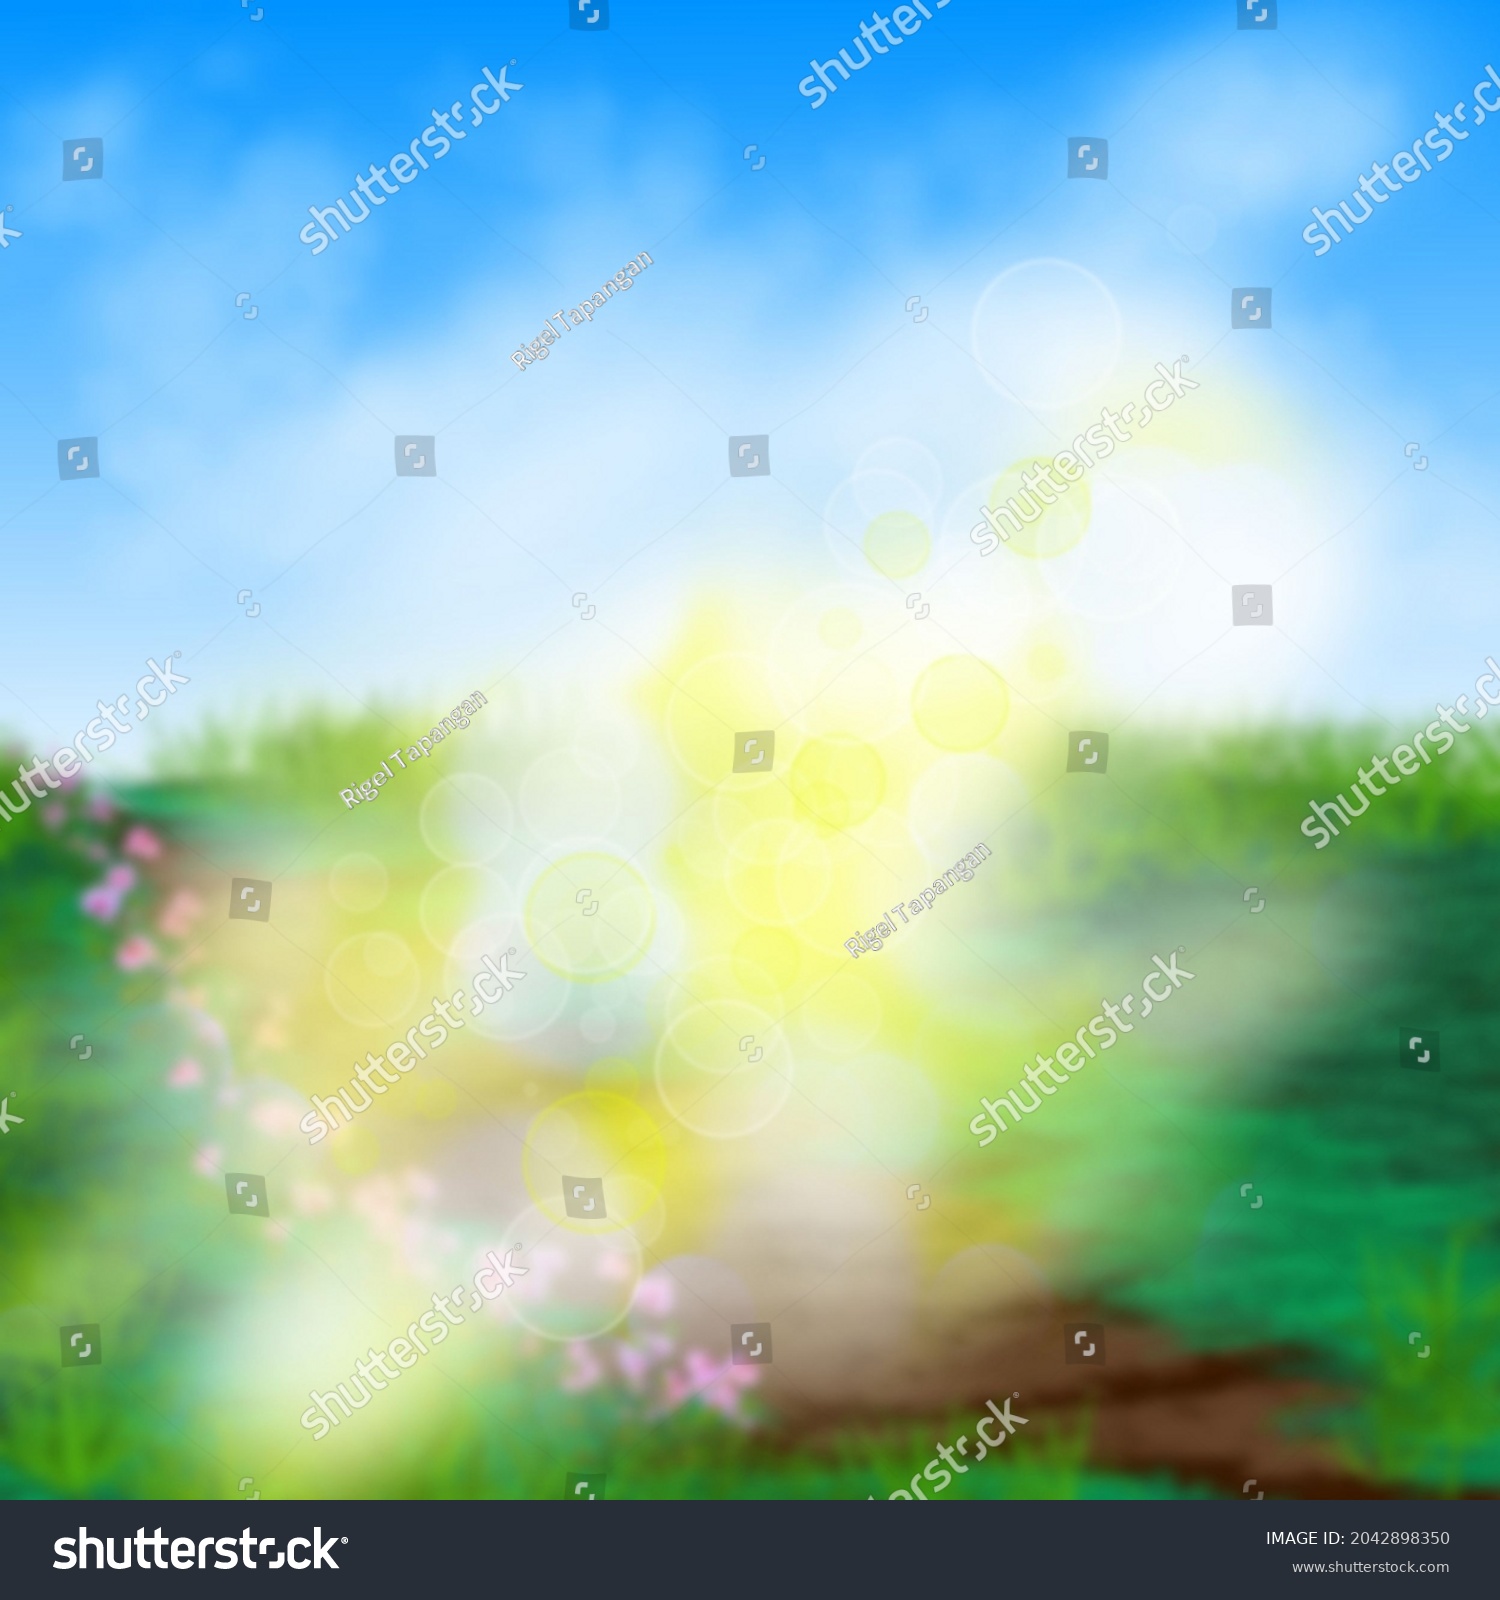 Abstract blurred nature background with bokeh or defocused for creative designs. Green leaves bokeh out of focus background from forest. Nature spring and natural light in blur style with copy space. #2042898350